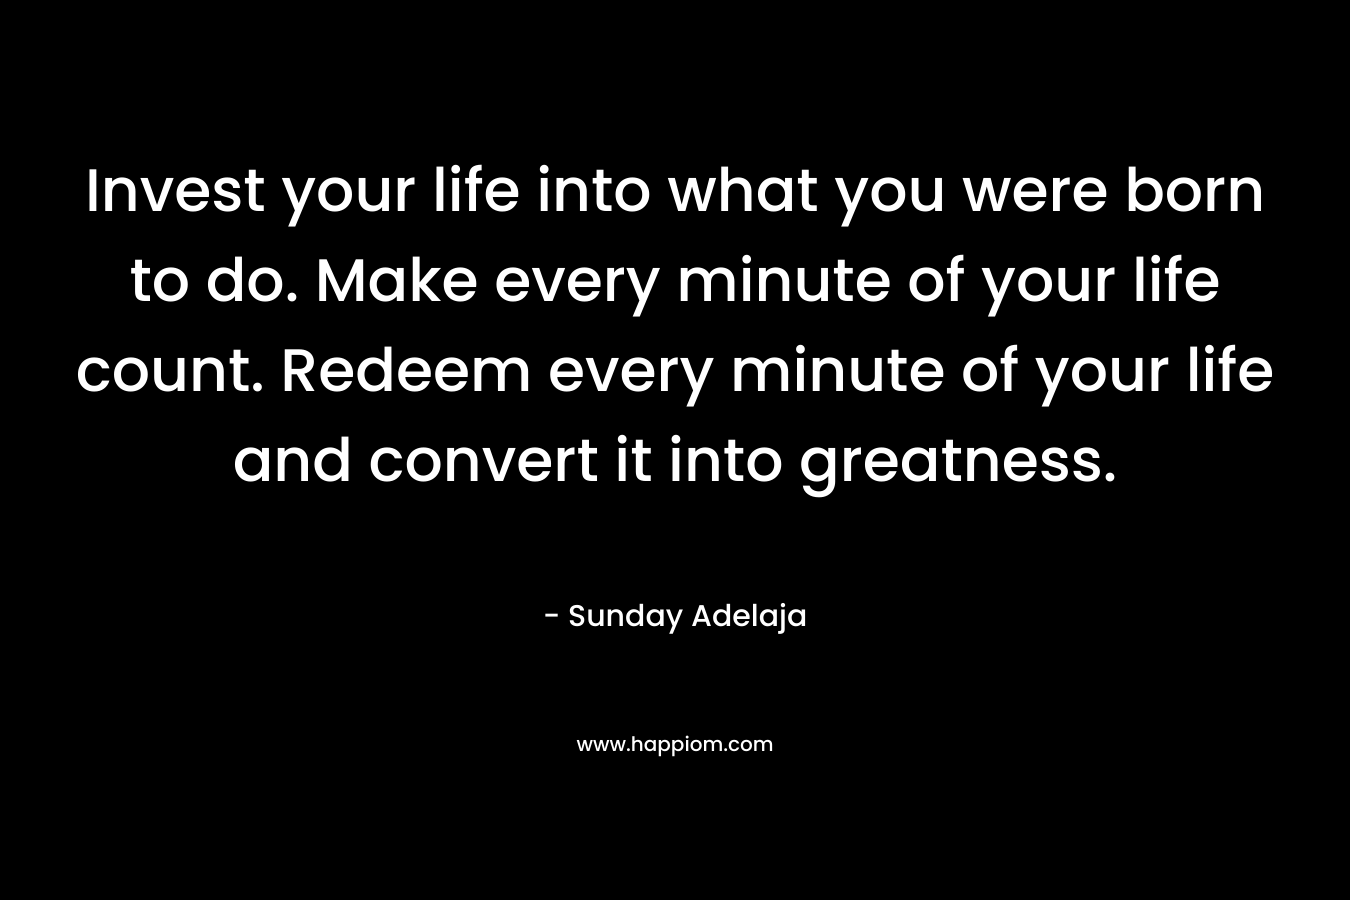 Invest your life into what you were born to do. Make every minute of your life count. Redeem every minute of your life and convert it into greatness.